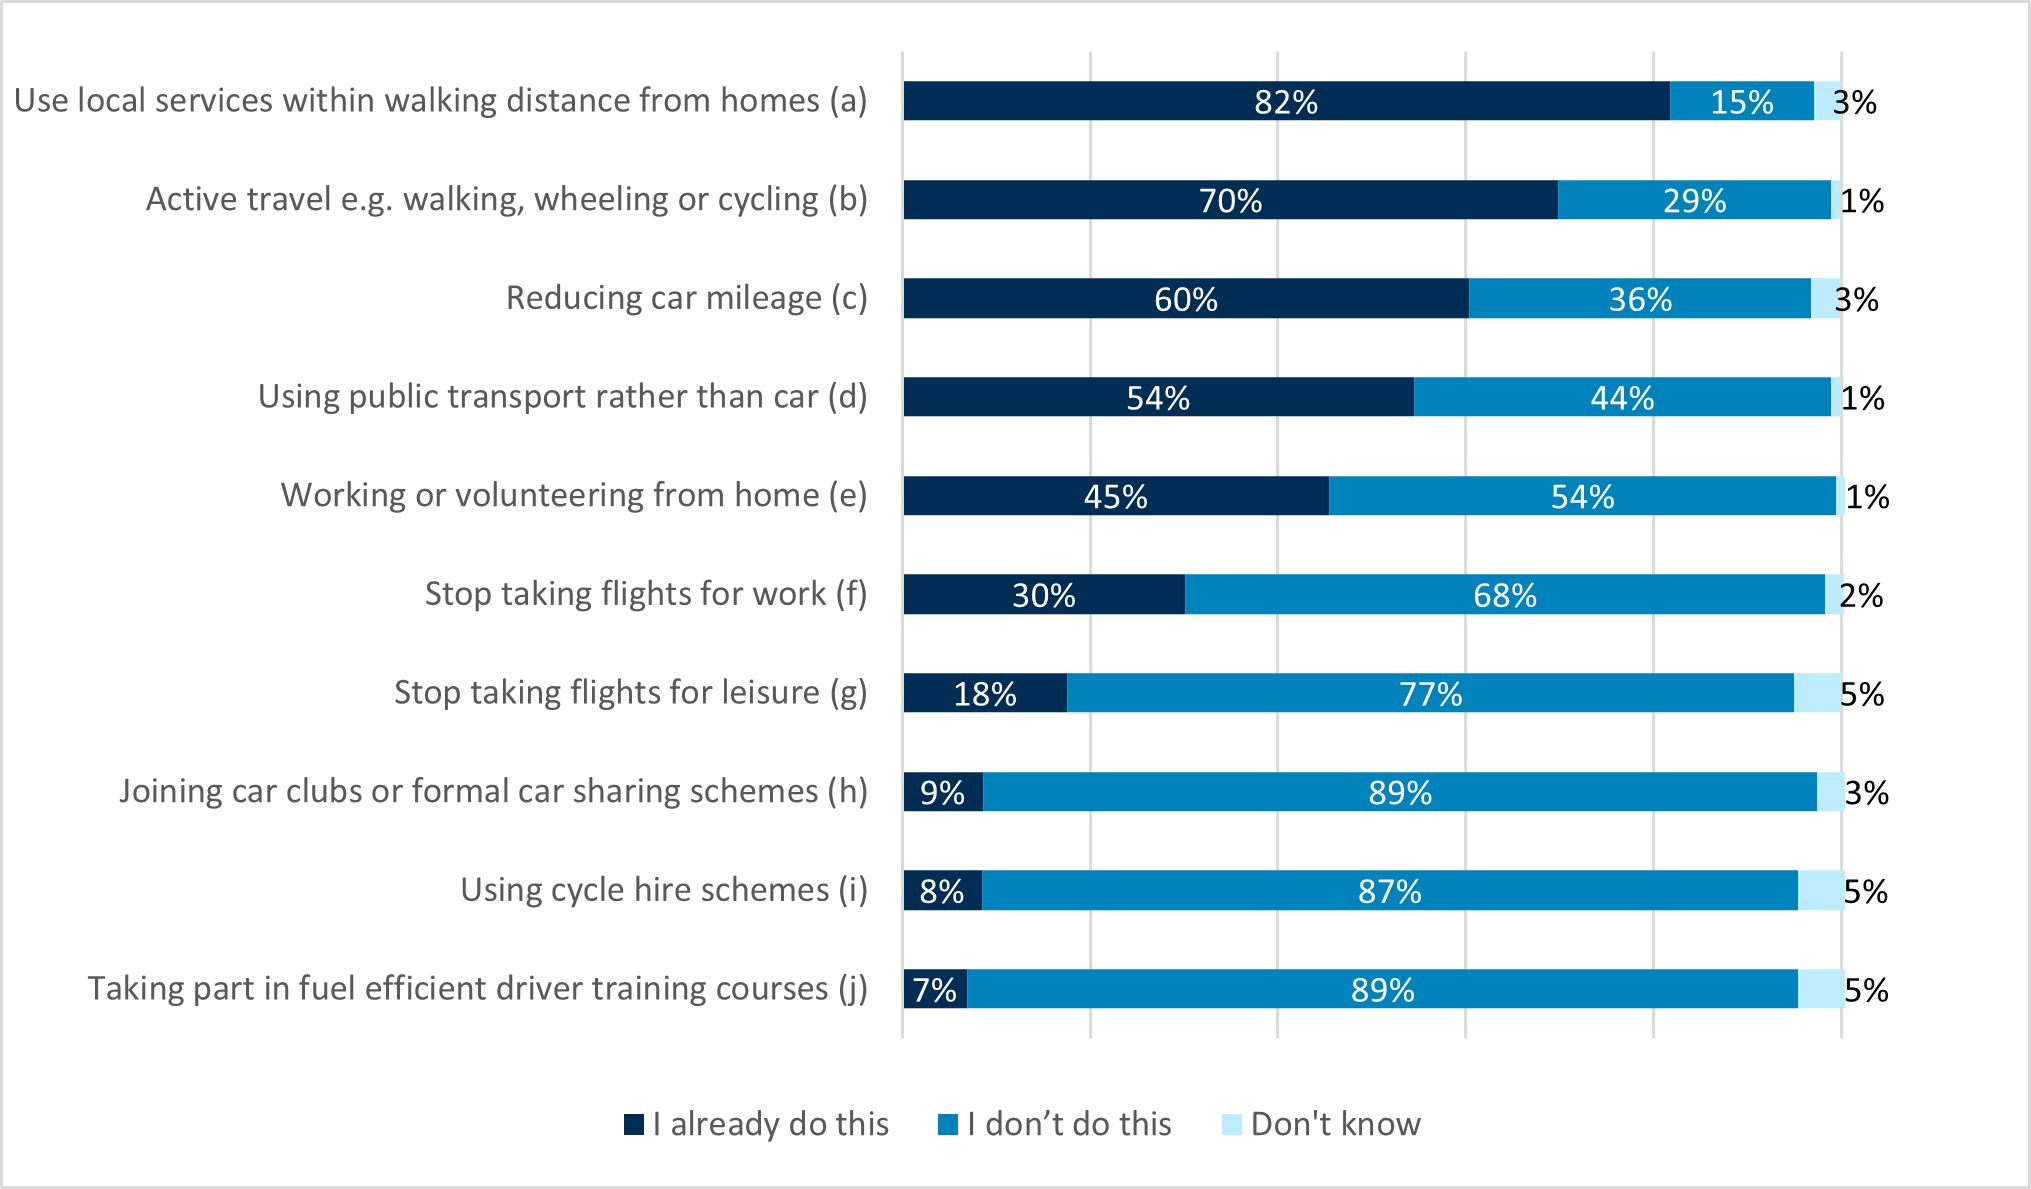 Data showing majority (82%) of respondents stated they are already using local services (for example doctors) within walking distance from their home. 70% state to be making active travel choices, by walking or cycling. One in six (60%) respondents are trying to reduce their car mileage. Just over half use public transport over a car (54%). Transport behaviours respondents are least likely to be doing are: 7% have taken part in fuel efficient courses, 8% made use of a cycle hire scheme, 9% joined a car club